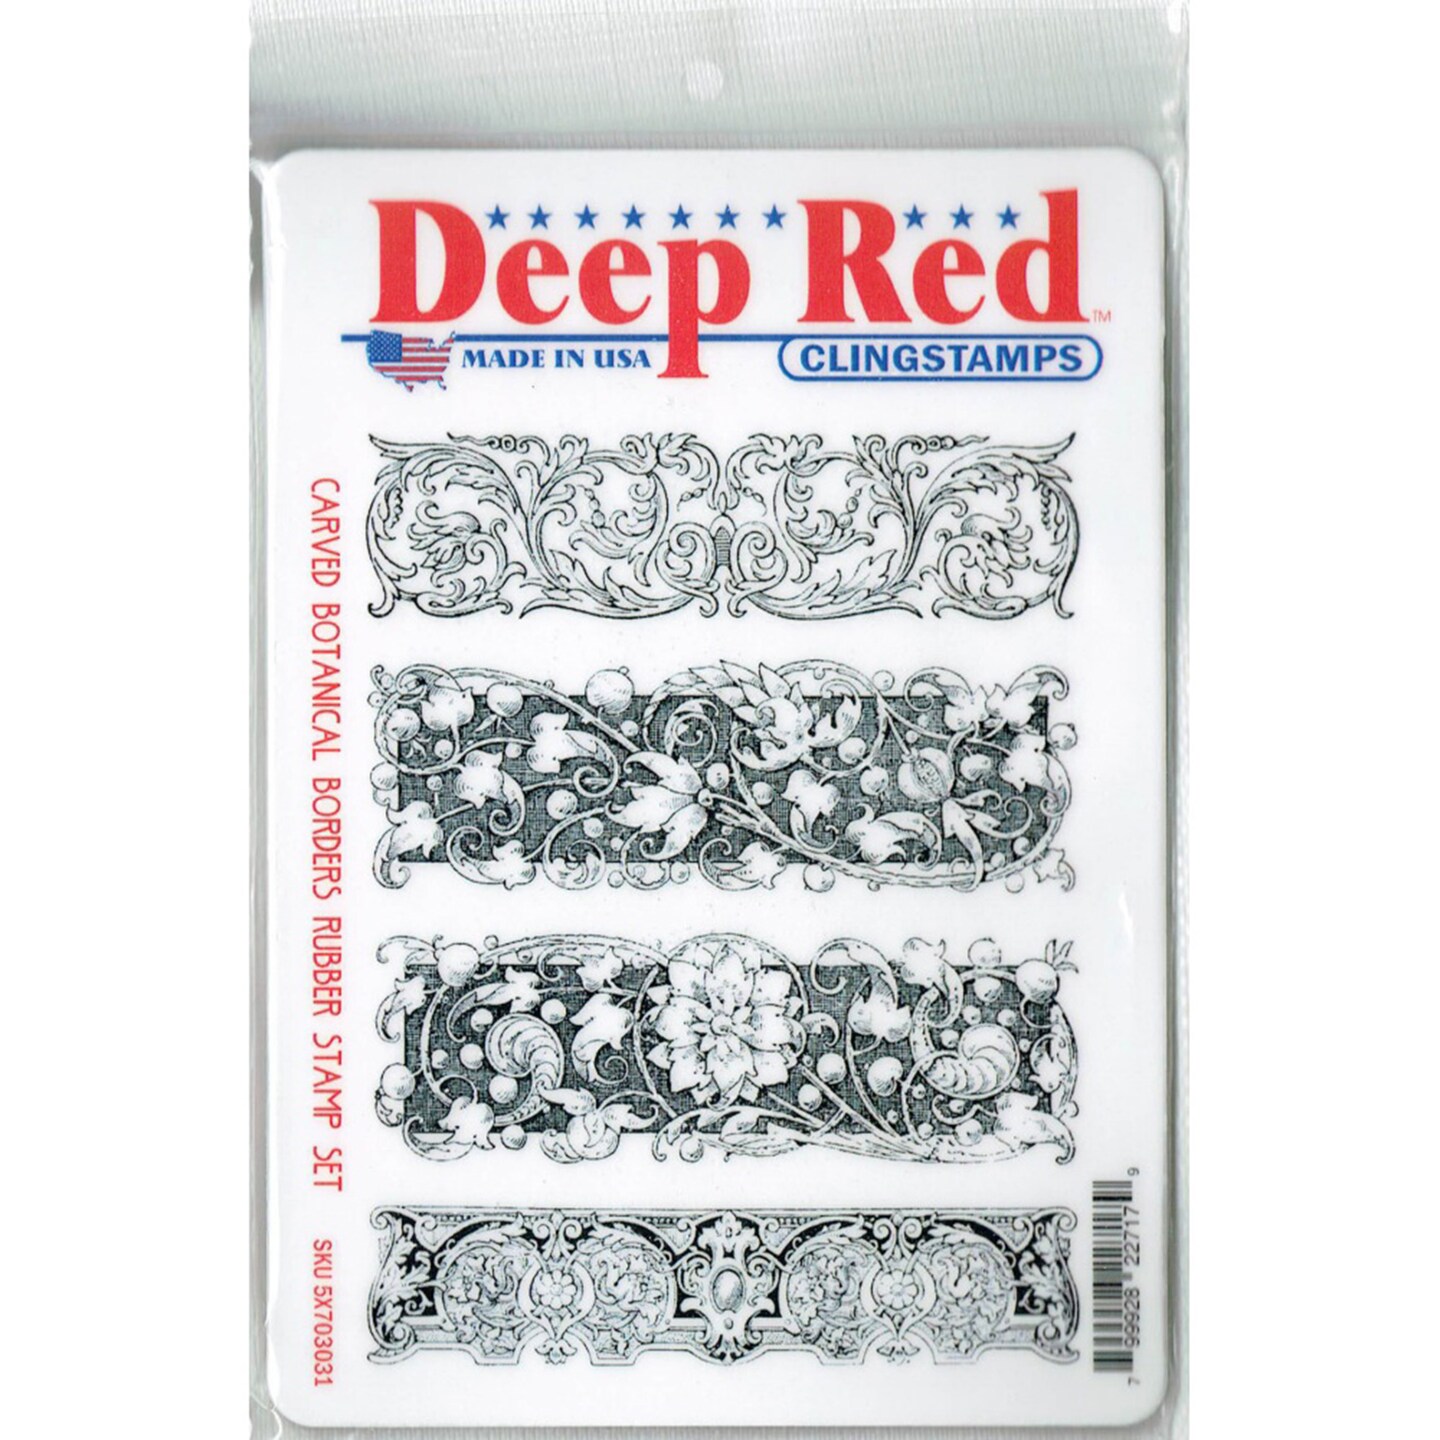 Deep Red Stamps Carved Botanical Borders Rubber Cling Stamp Set 4.25 x 5.5 inches